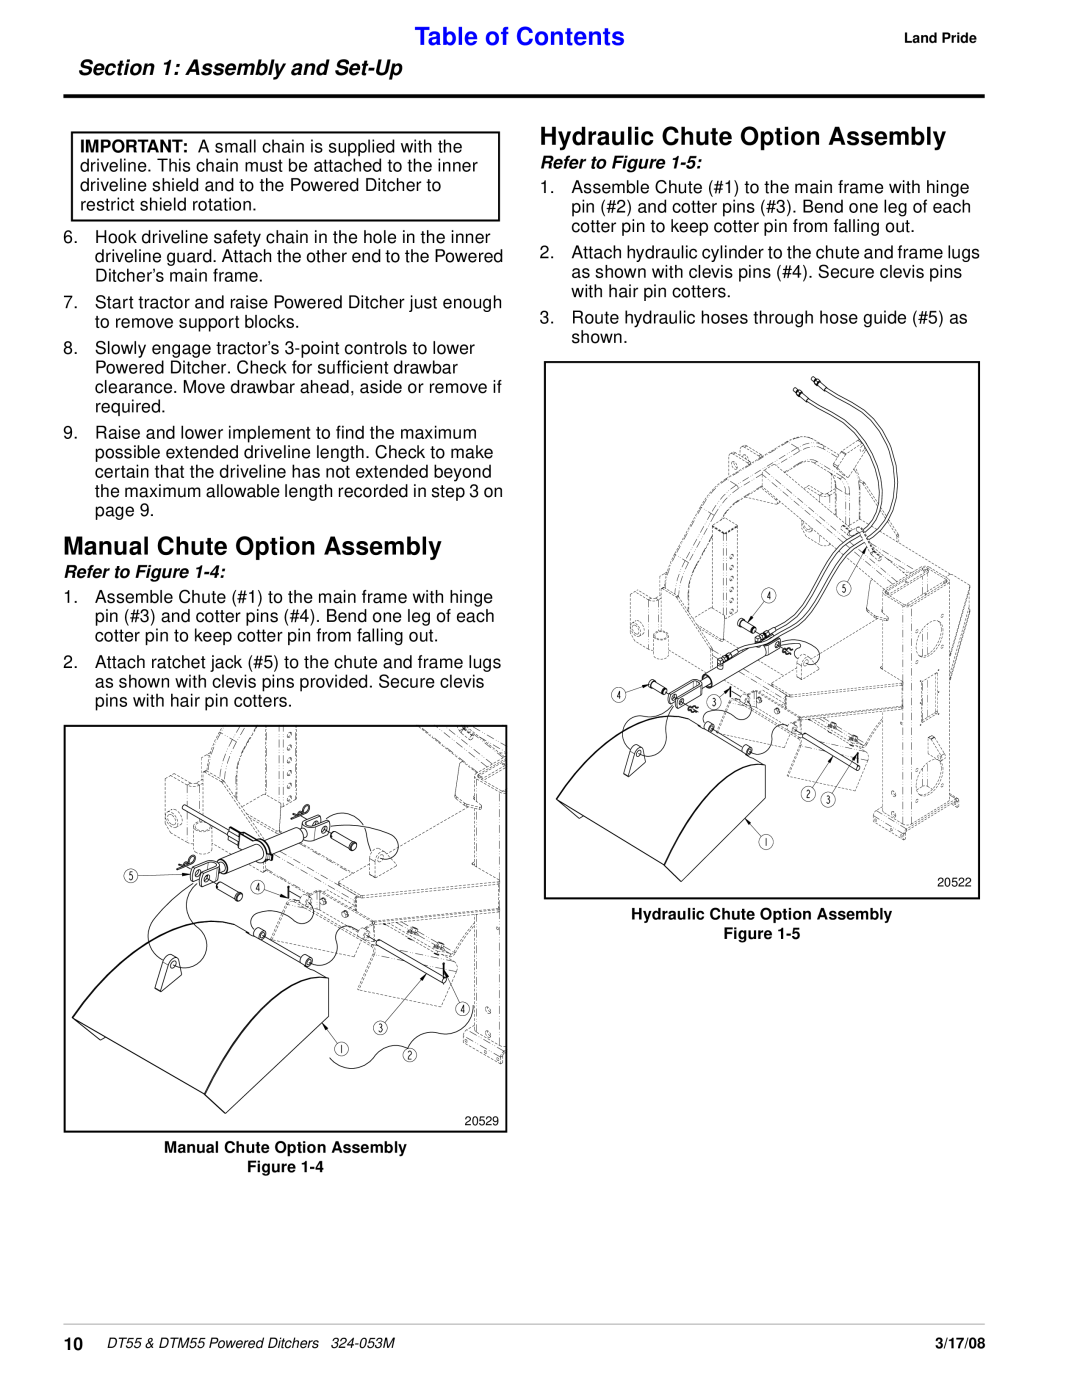 Land Pride DTM55 Manual Chute Option Assembly, Hydraulic Chute Option Assembly, Table of Contents, Assembly and Set-Up 